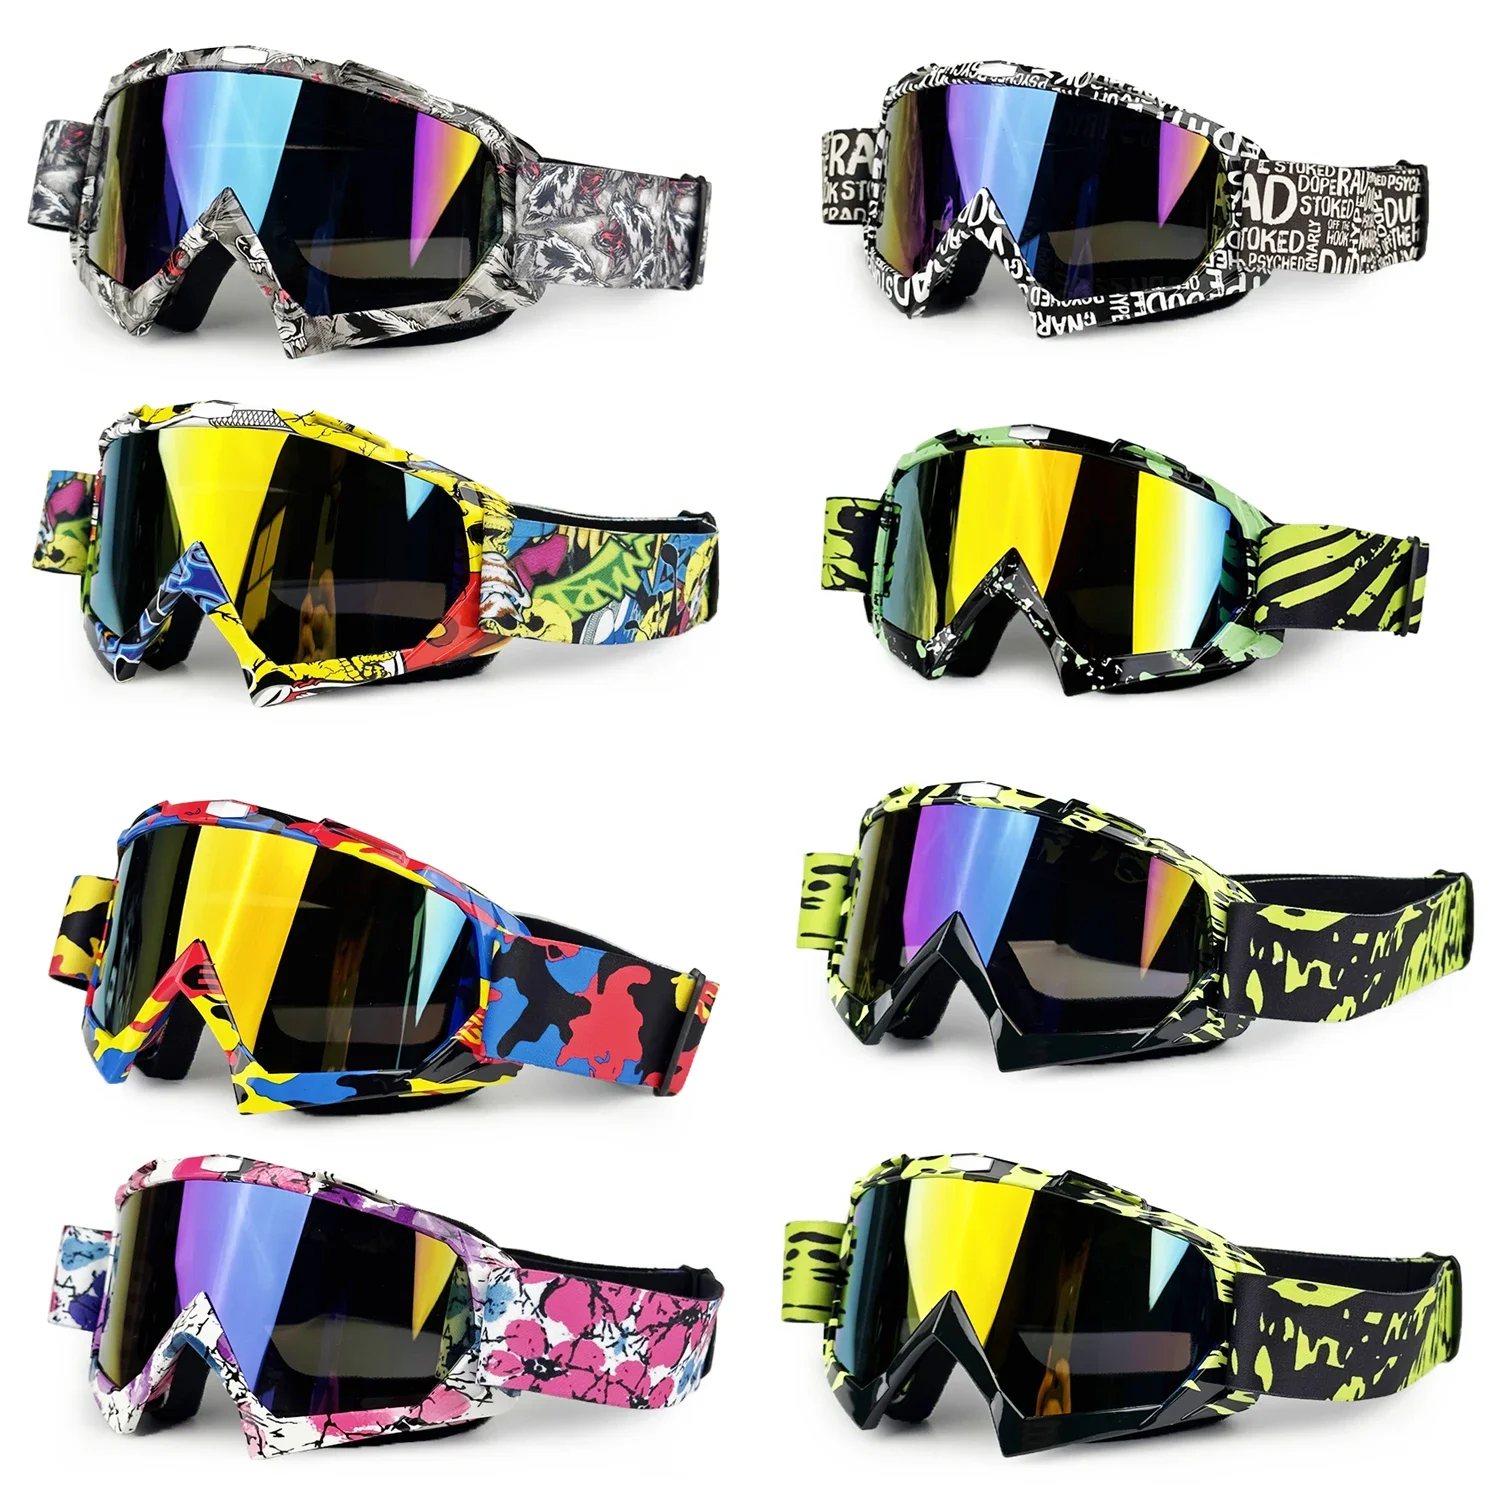 

Hot Motorcycle Goggles for Men Motocross Sunglasses Safety Protective MX Night Vision Helmet Motocross Goggles Driving Glasses